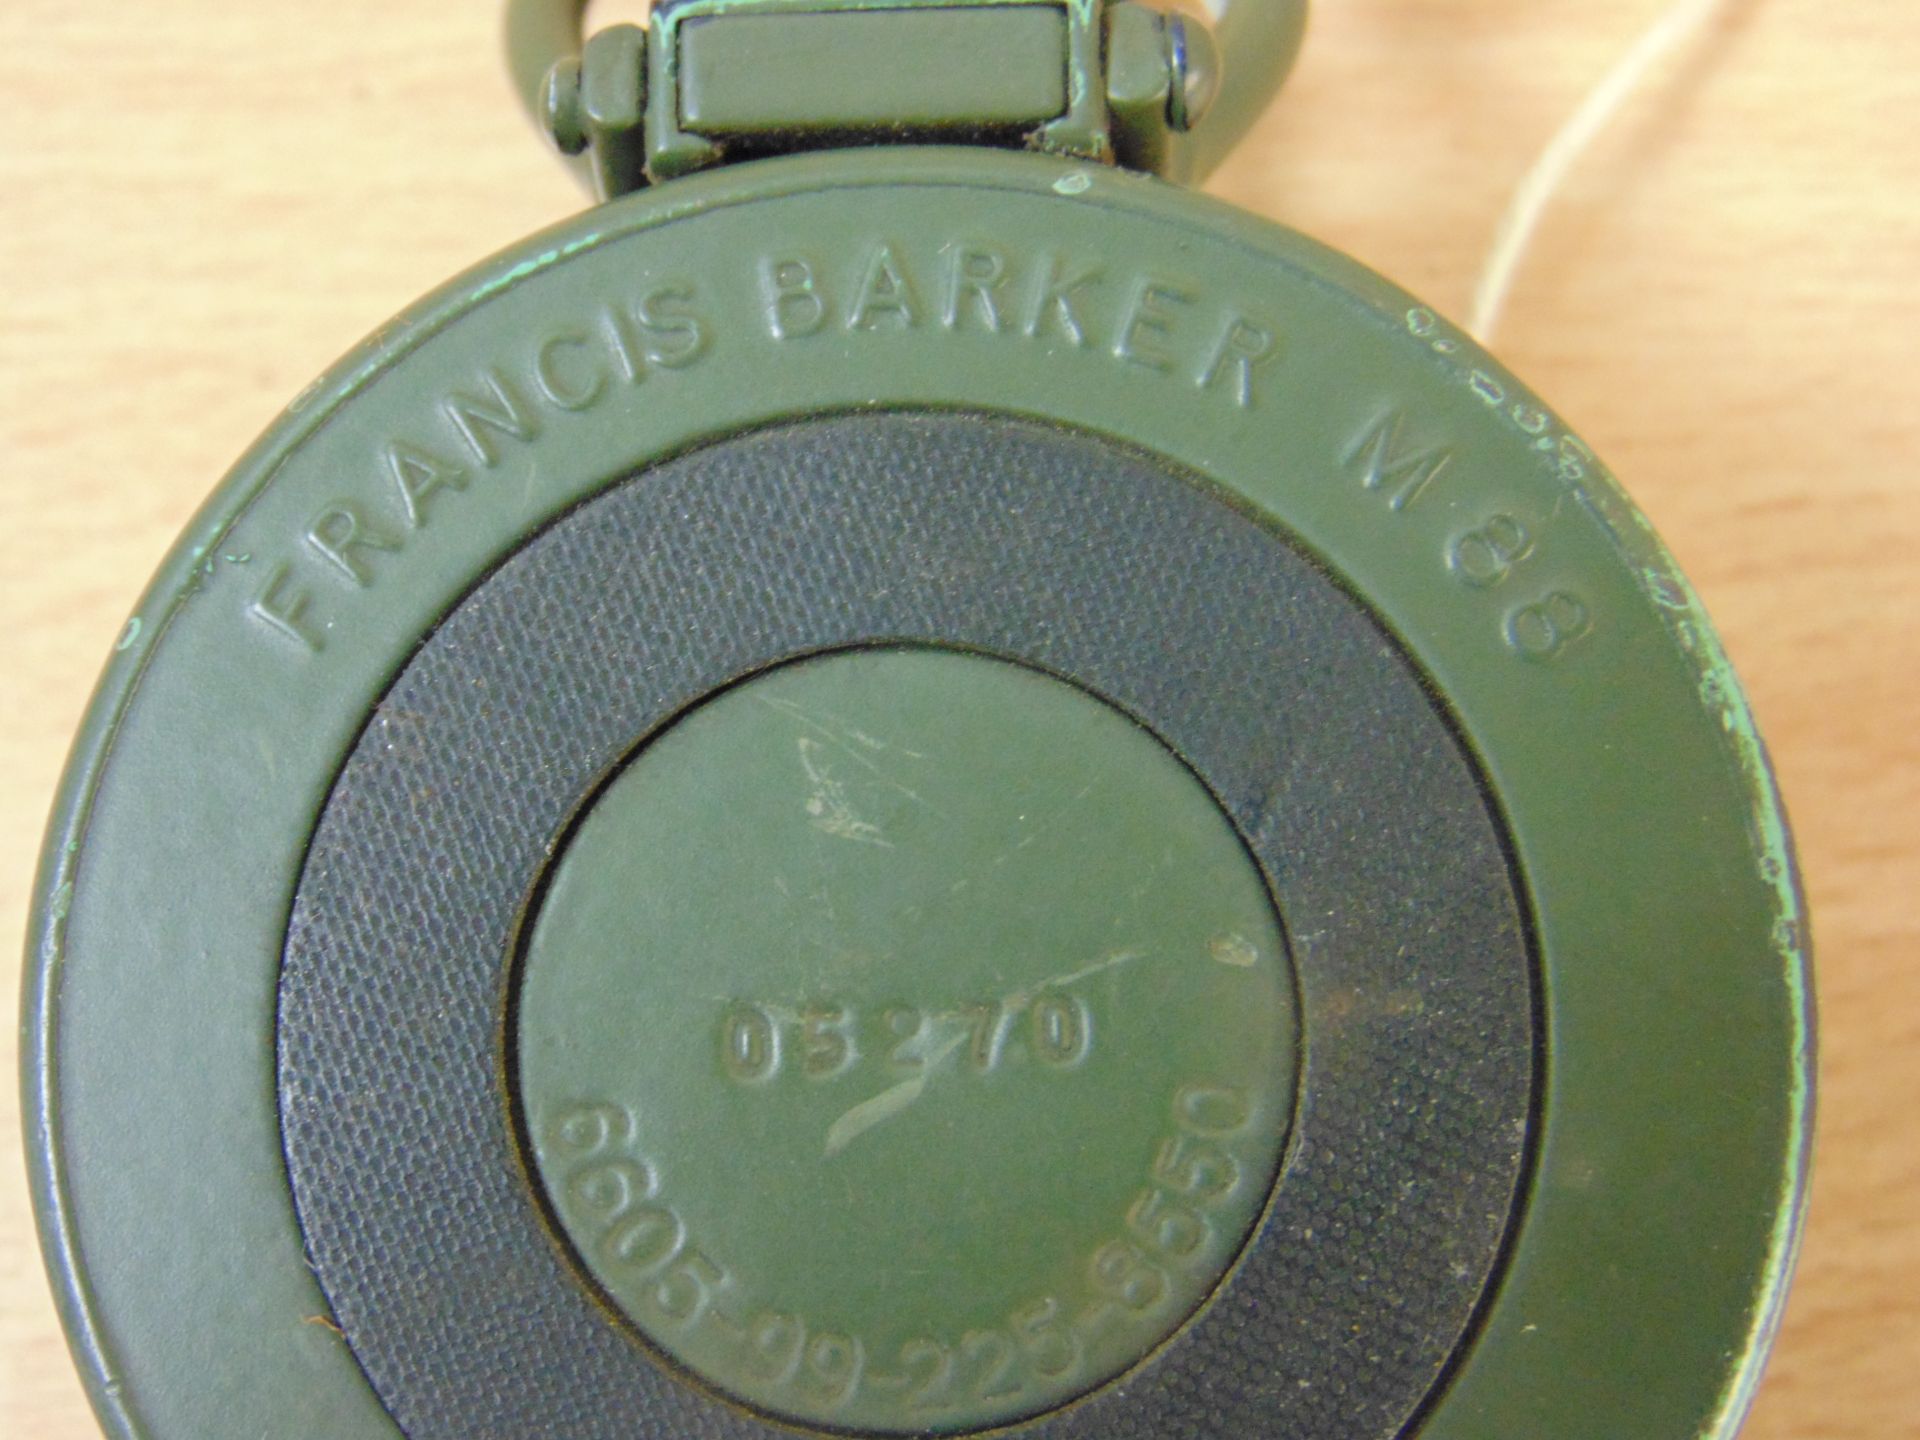 BRITISH ARMY FRANCIS BARKER M88 PRISMATIC COMPASS NATO MARKED- MADE IN UK - NO BUBBLES - Image 6 of 7